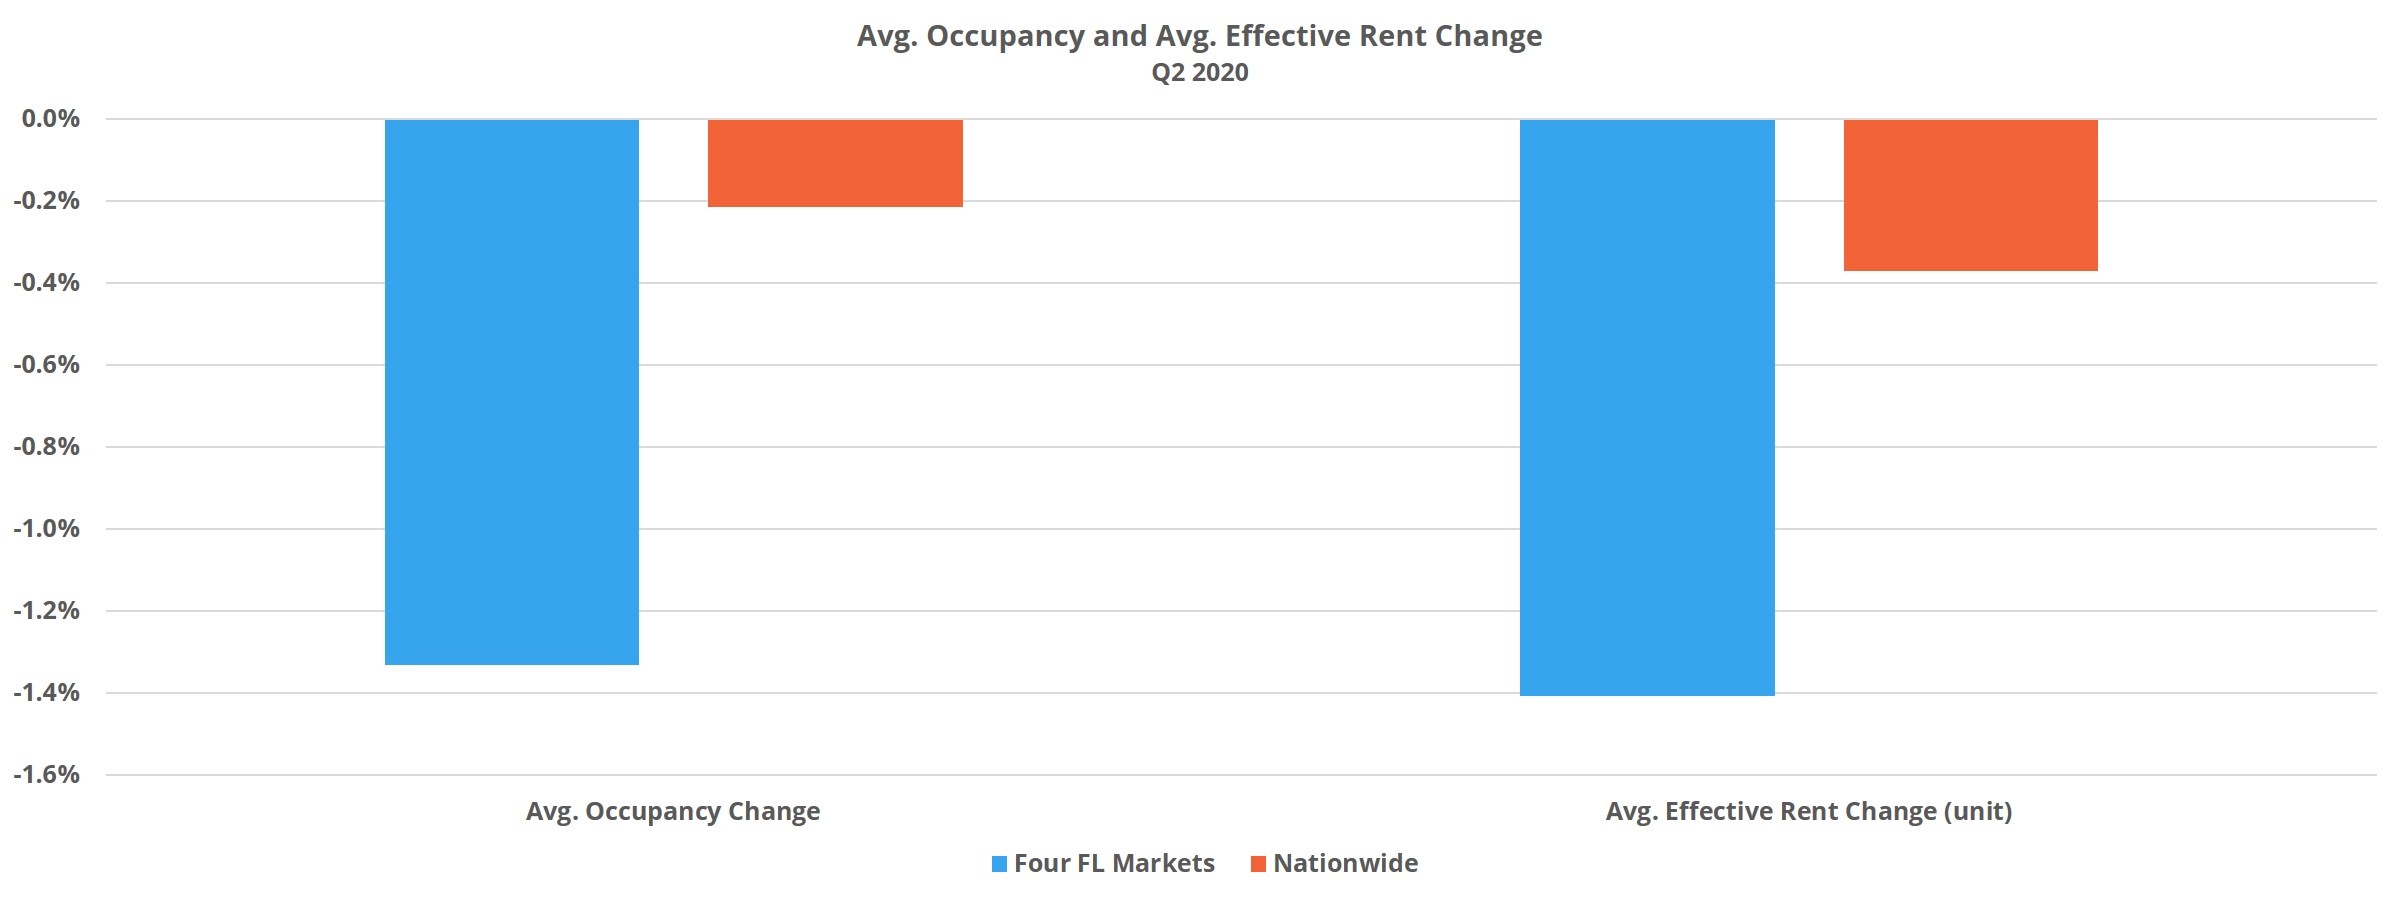 Avg. Occupancy and Avg. Effective Rent Change